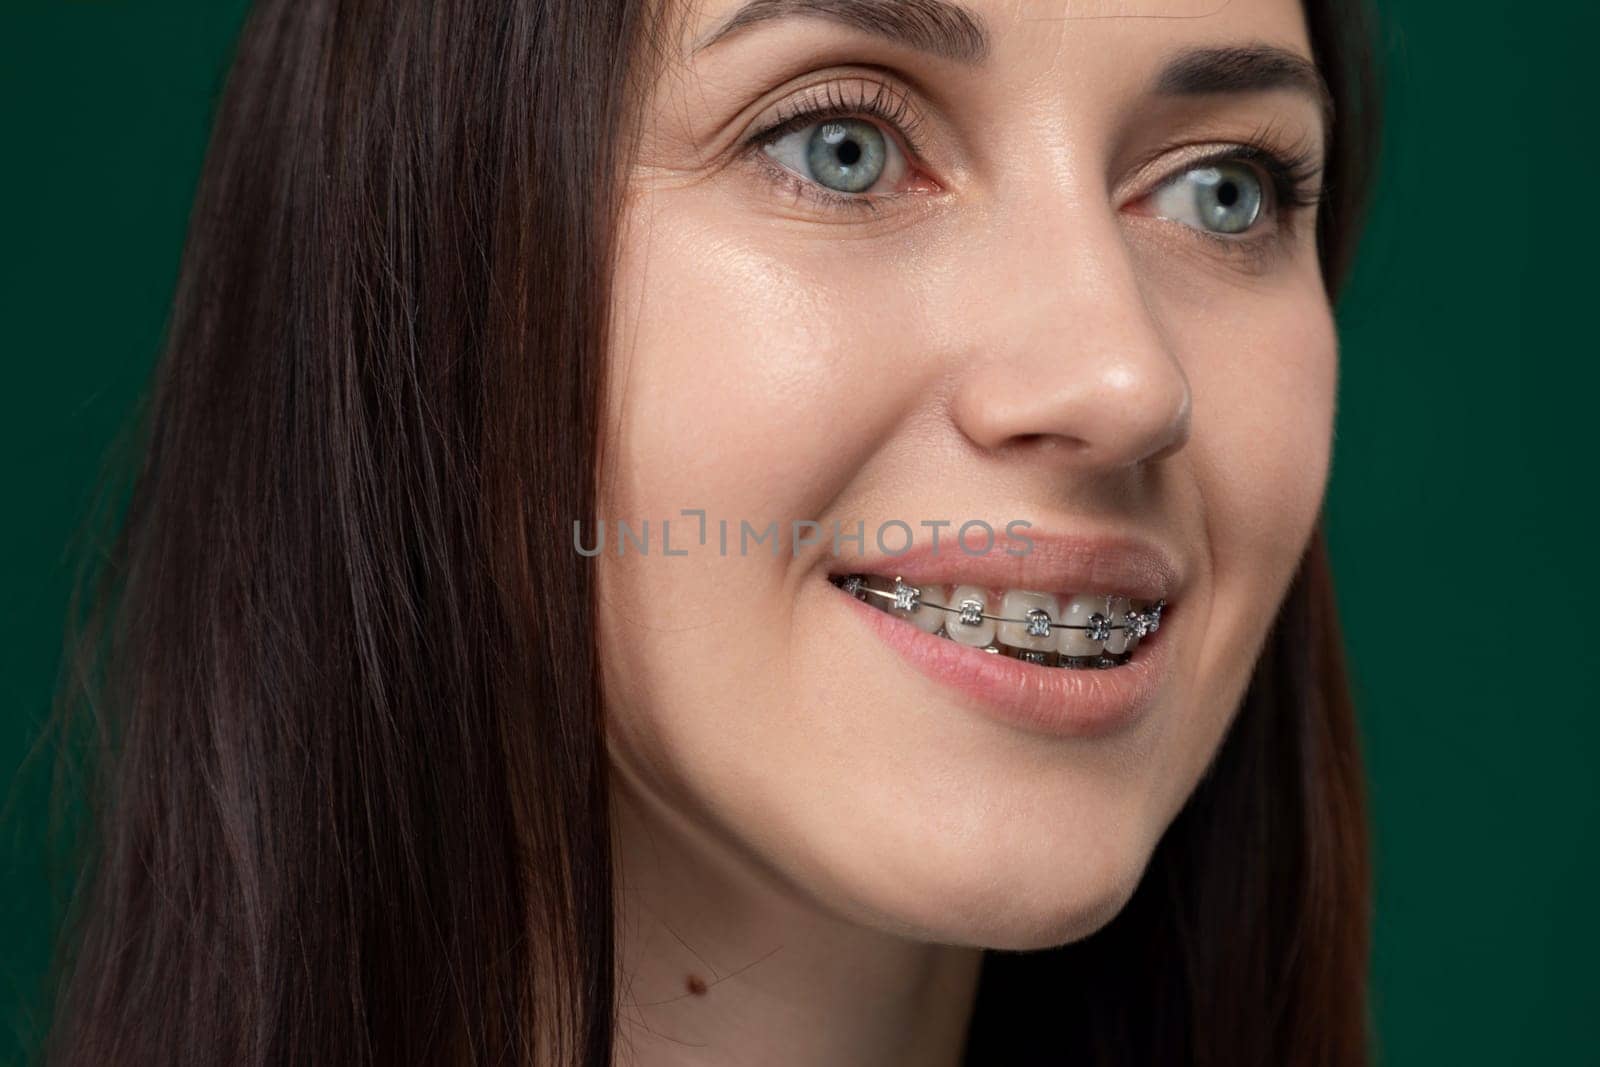 Woman With Braces Smiling by TRMK